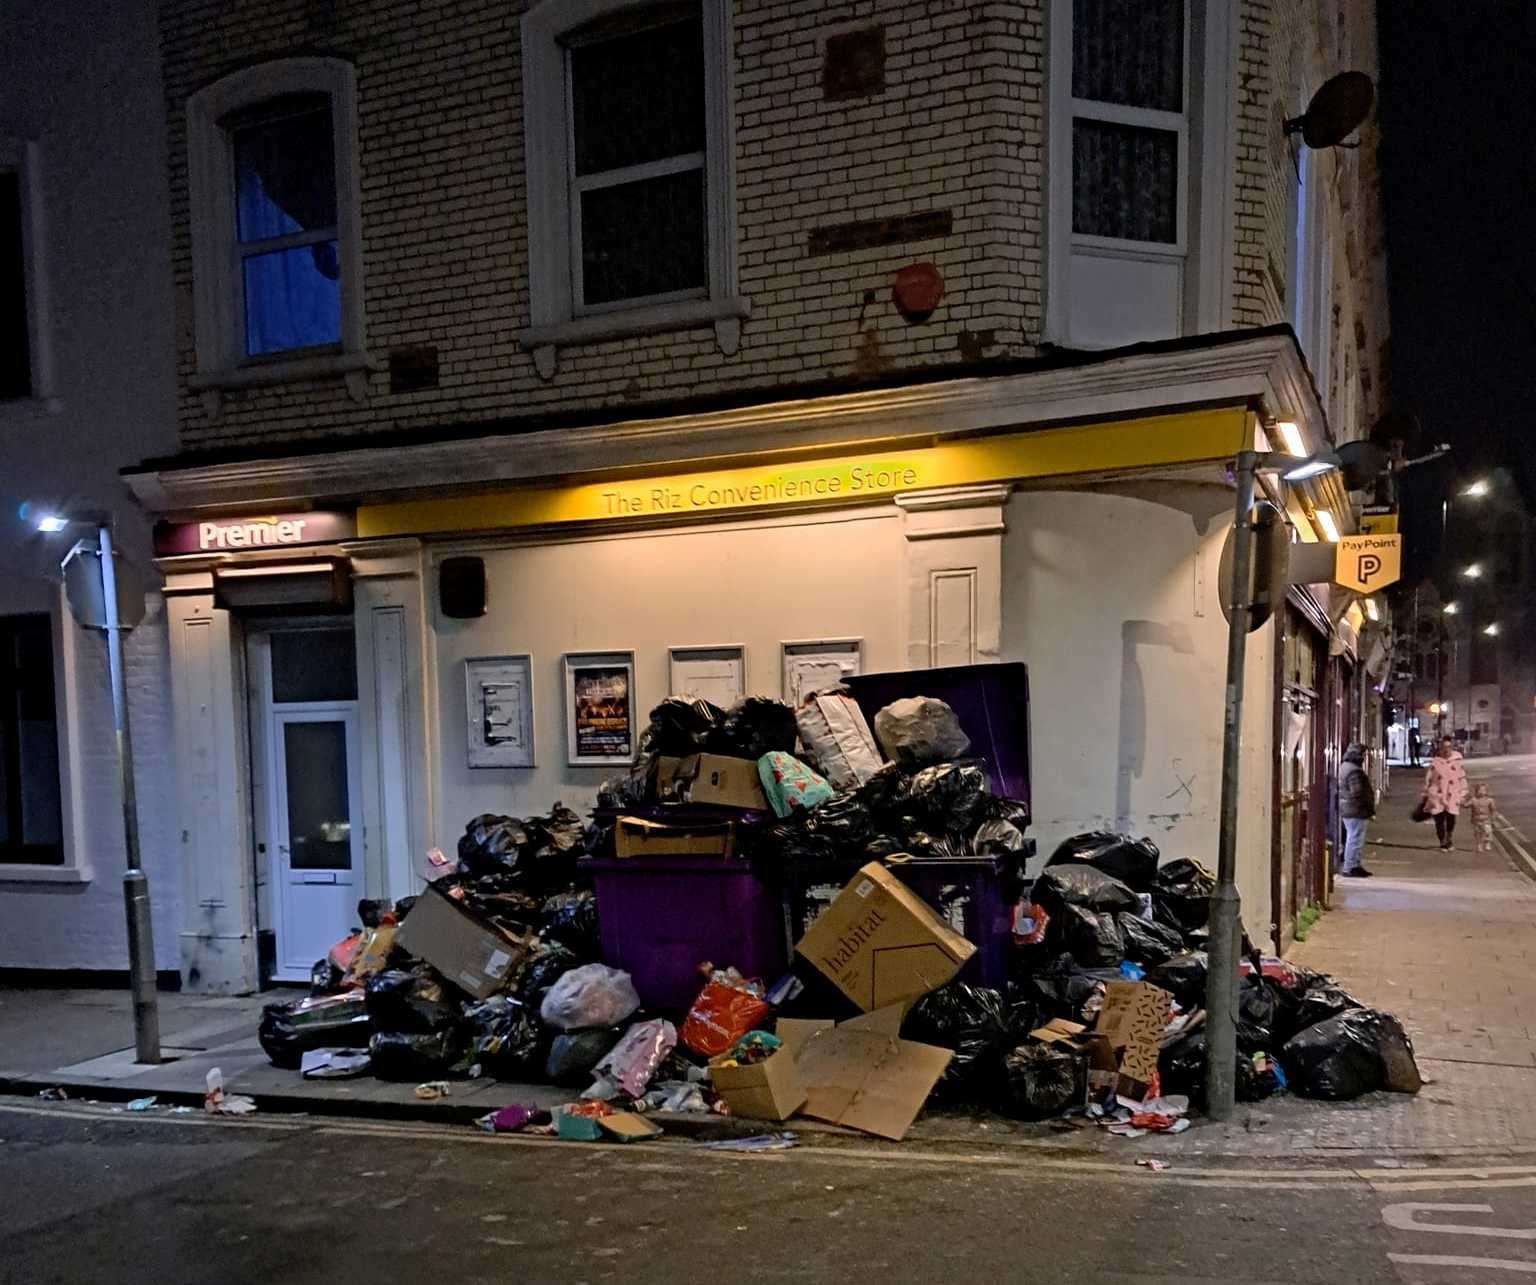 A mountain of waste was piled high in Ethelbert Road on Boxing Day. Picture: Roger Turner